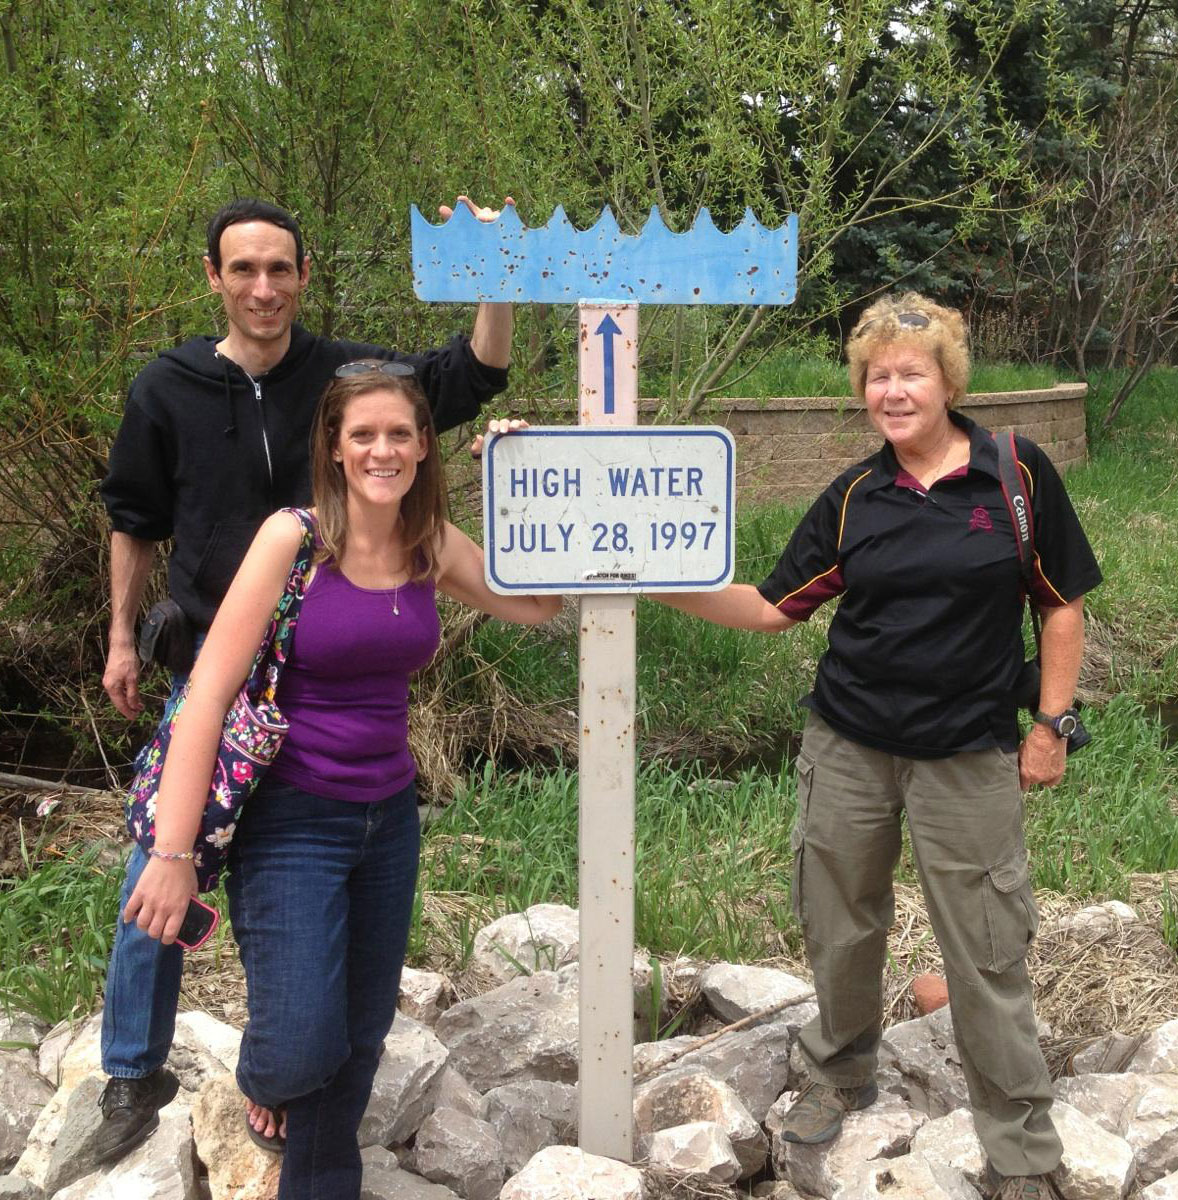 CoCoRaHS coordinators Tony (WY), Melissa (FL), and Nancy (AZ) at a high water mark for the 1997 Fort Collins, Colorado, flood.